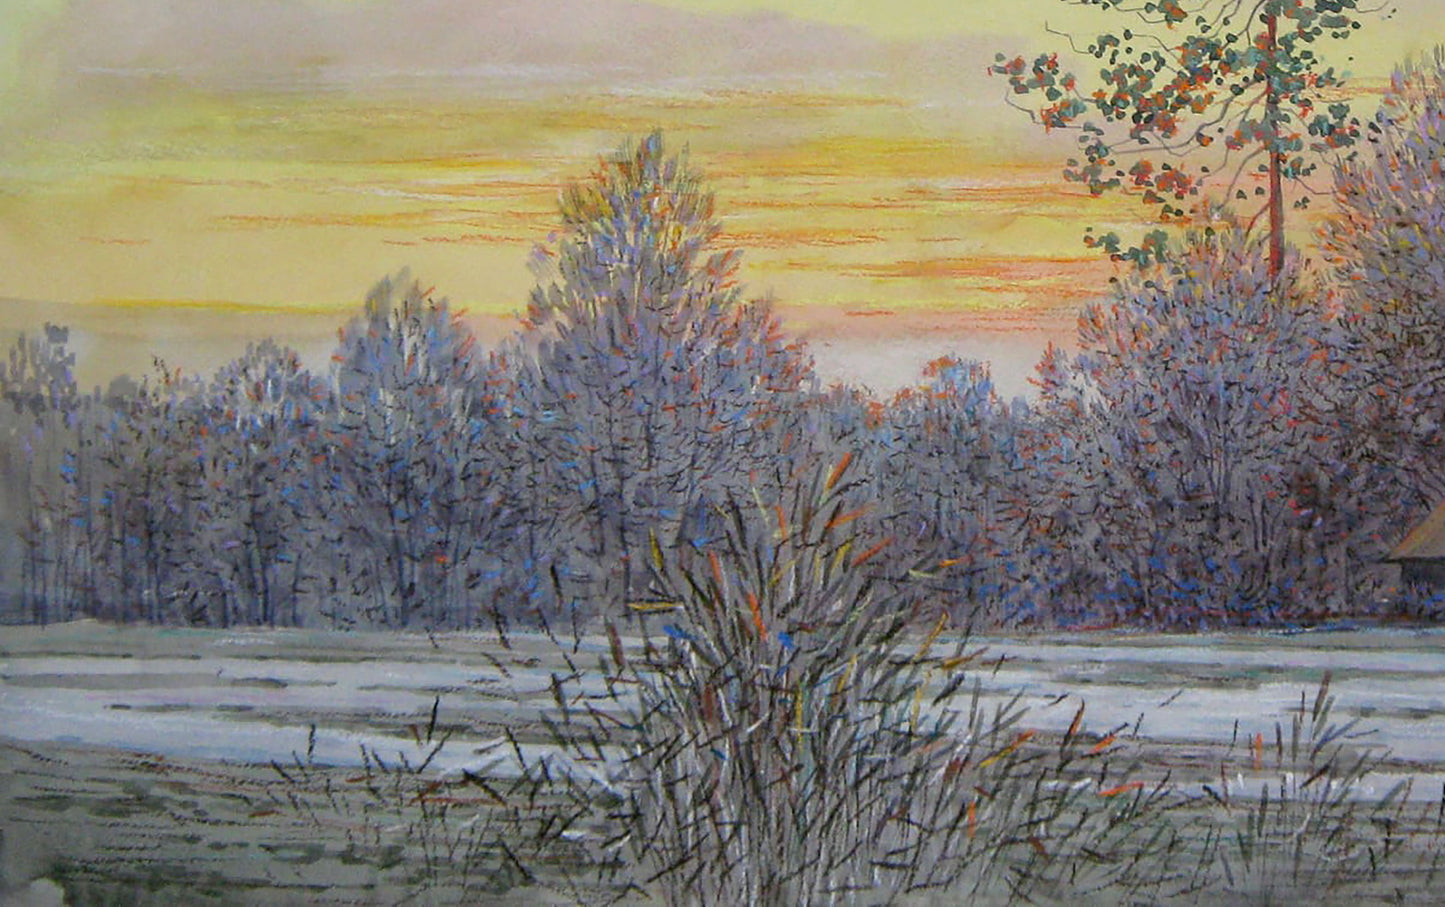 Watercolor painting March days Savenets Valery